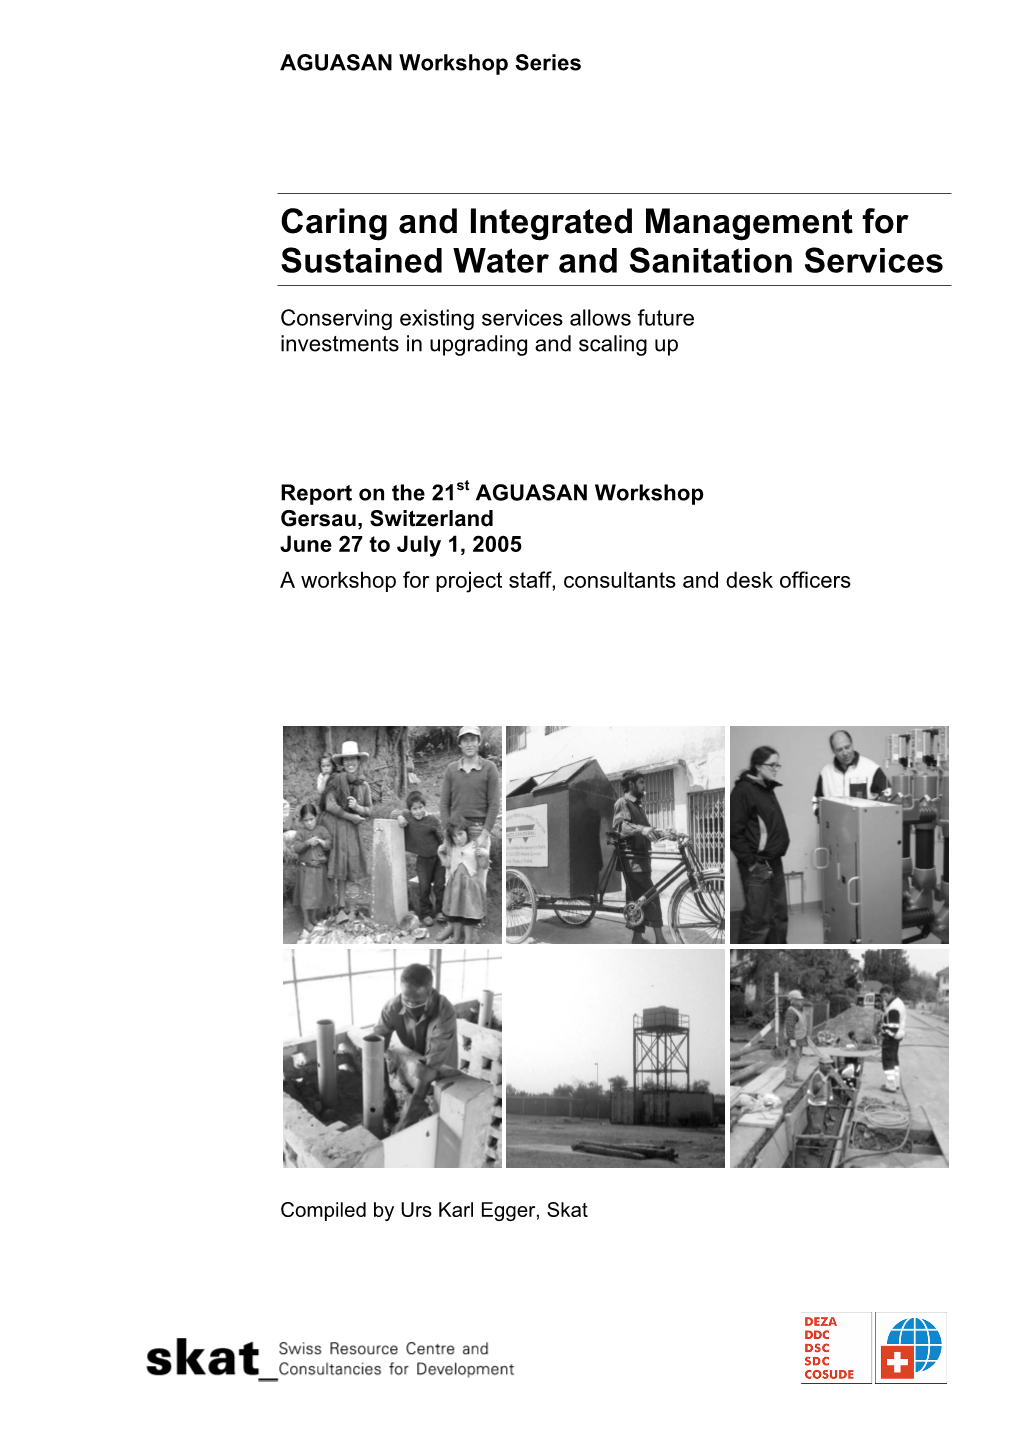 Caring and Integrated Management for Sustained Water and Sanitation Services